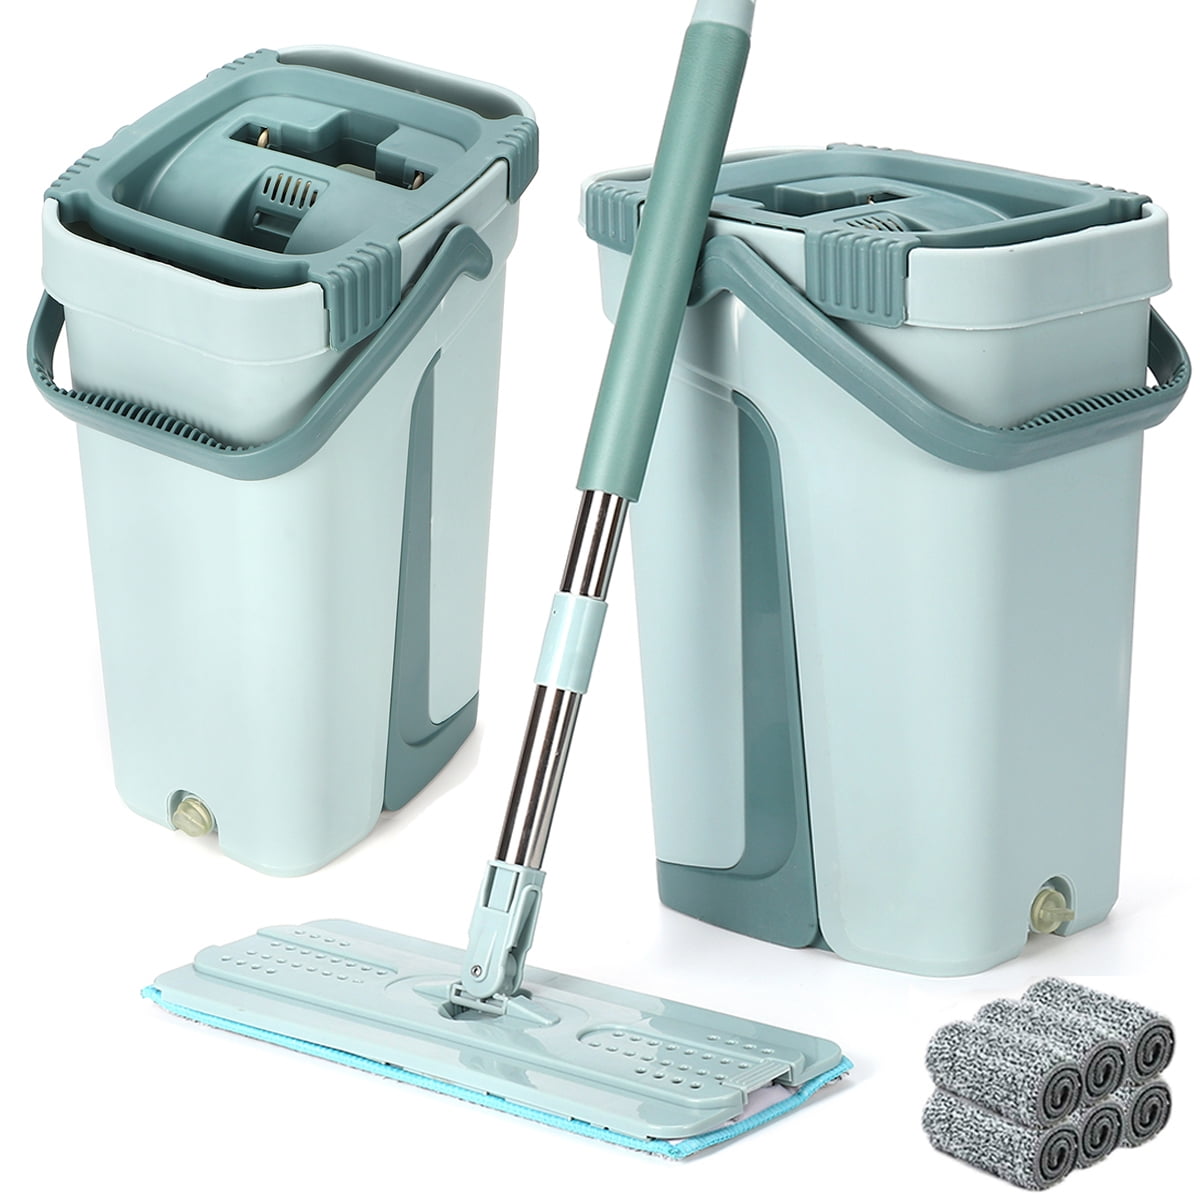 2/6/10 Pads Self Cleaning Mop Bucket System Flat Floor Drying Wringing Free Hand